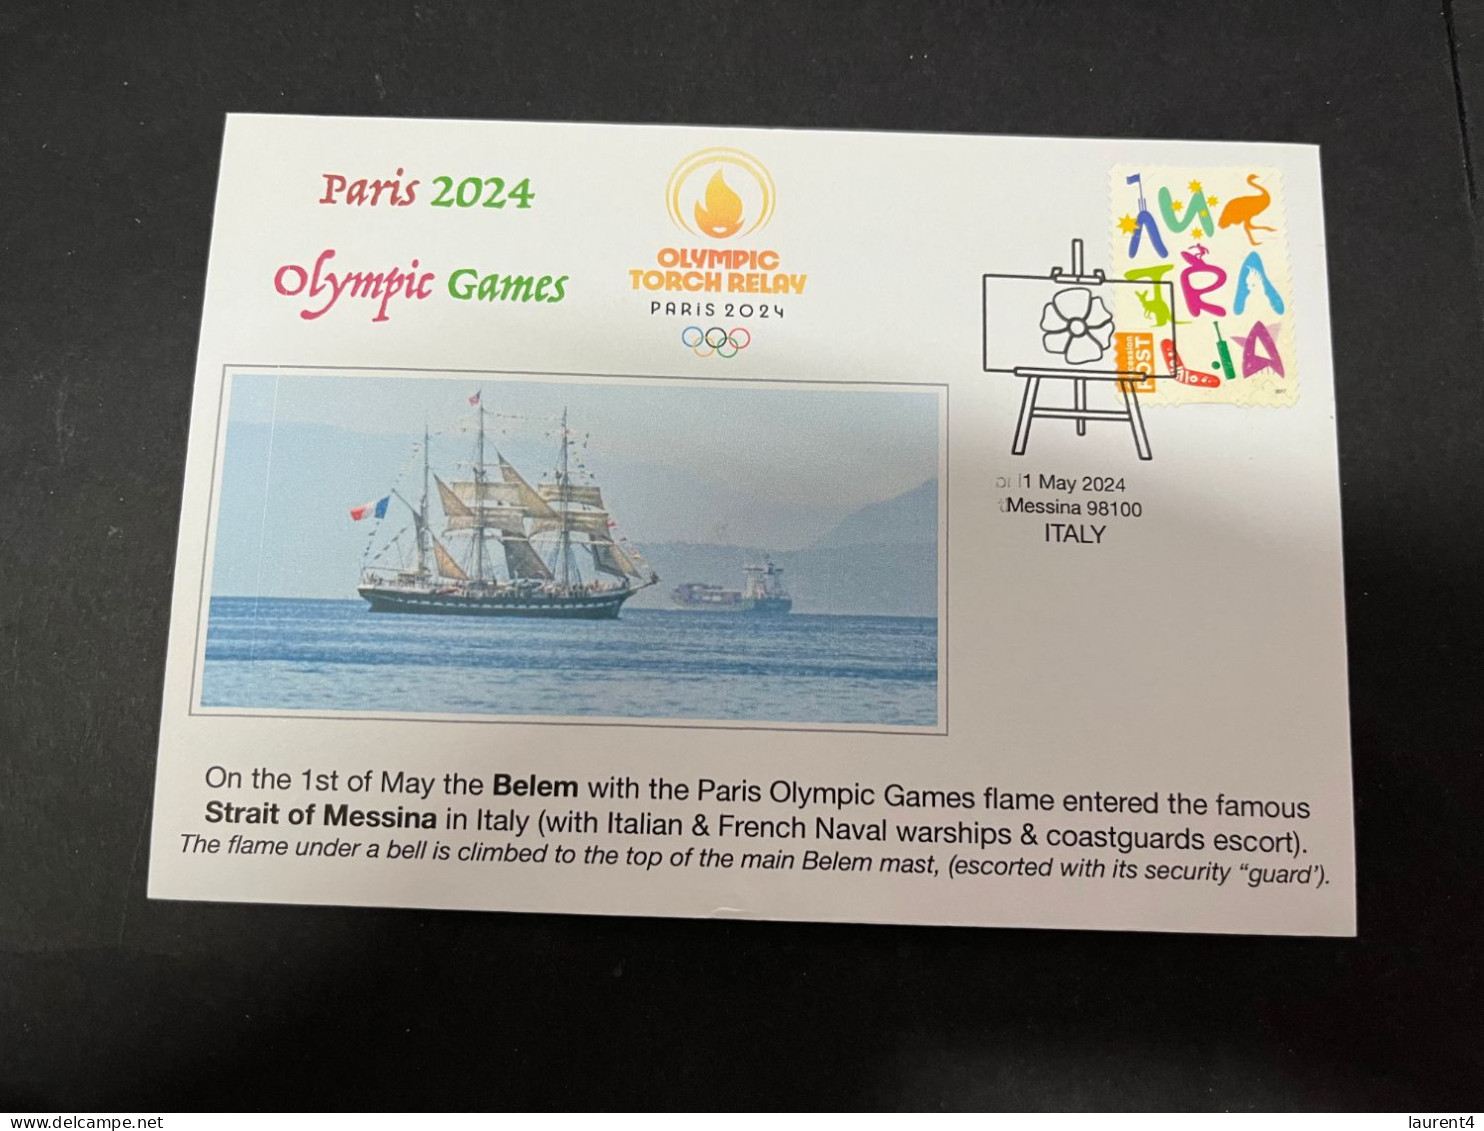 5-5-2024 (4 Z 12B) Paris Olympic Games 2024 - The Olympic Flame Travel On Sail Ship BELEM Via The Stait Of Messine (OZ) - Verano 2024 : París